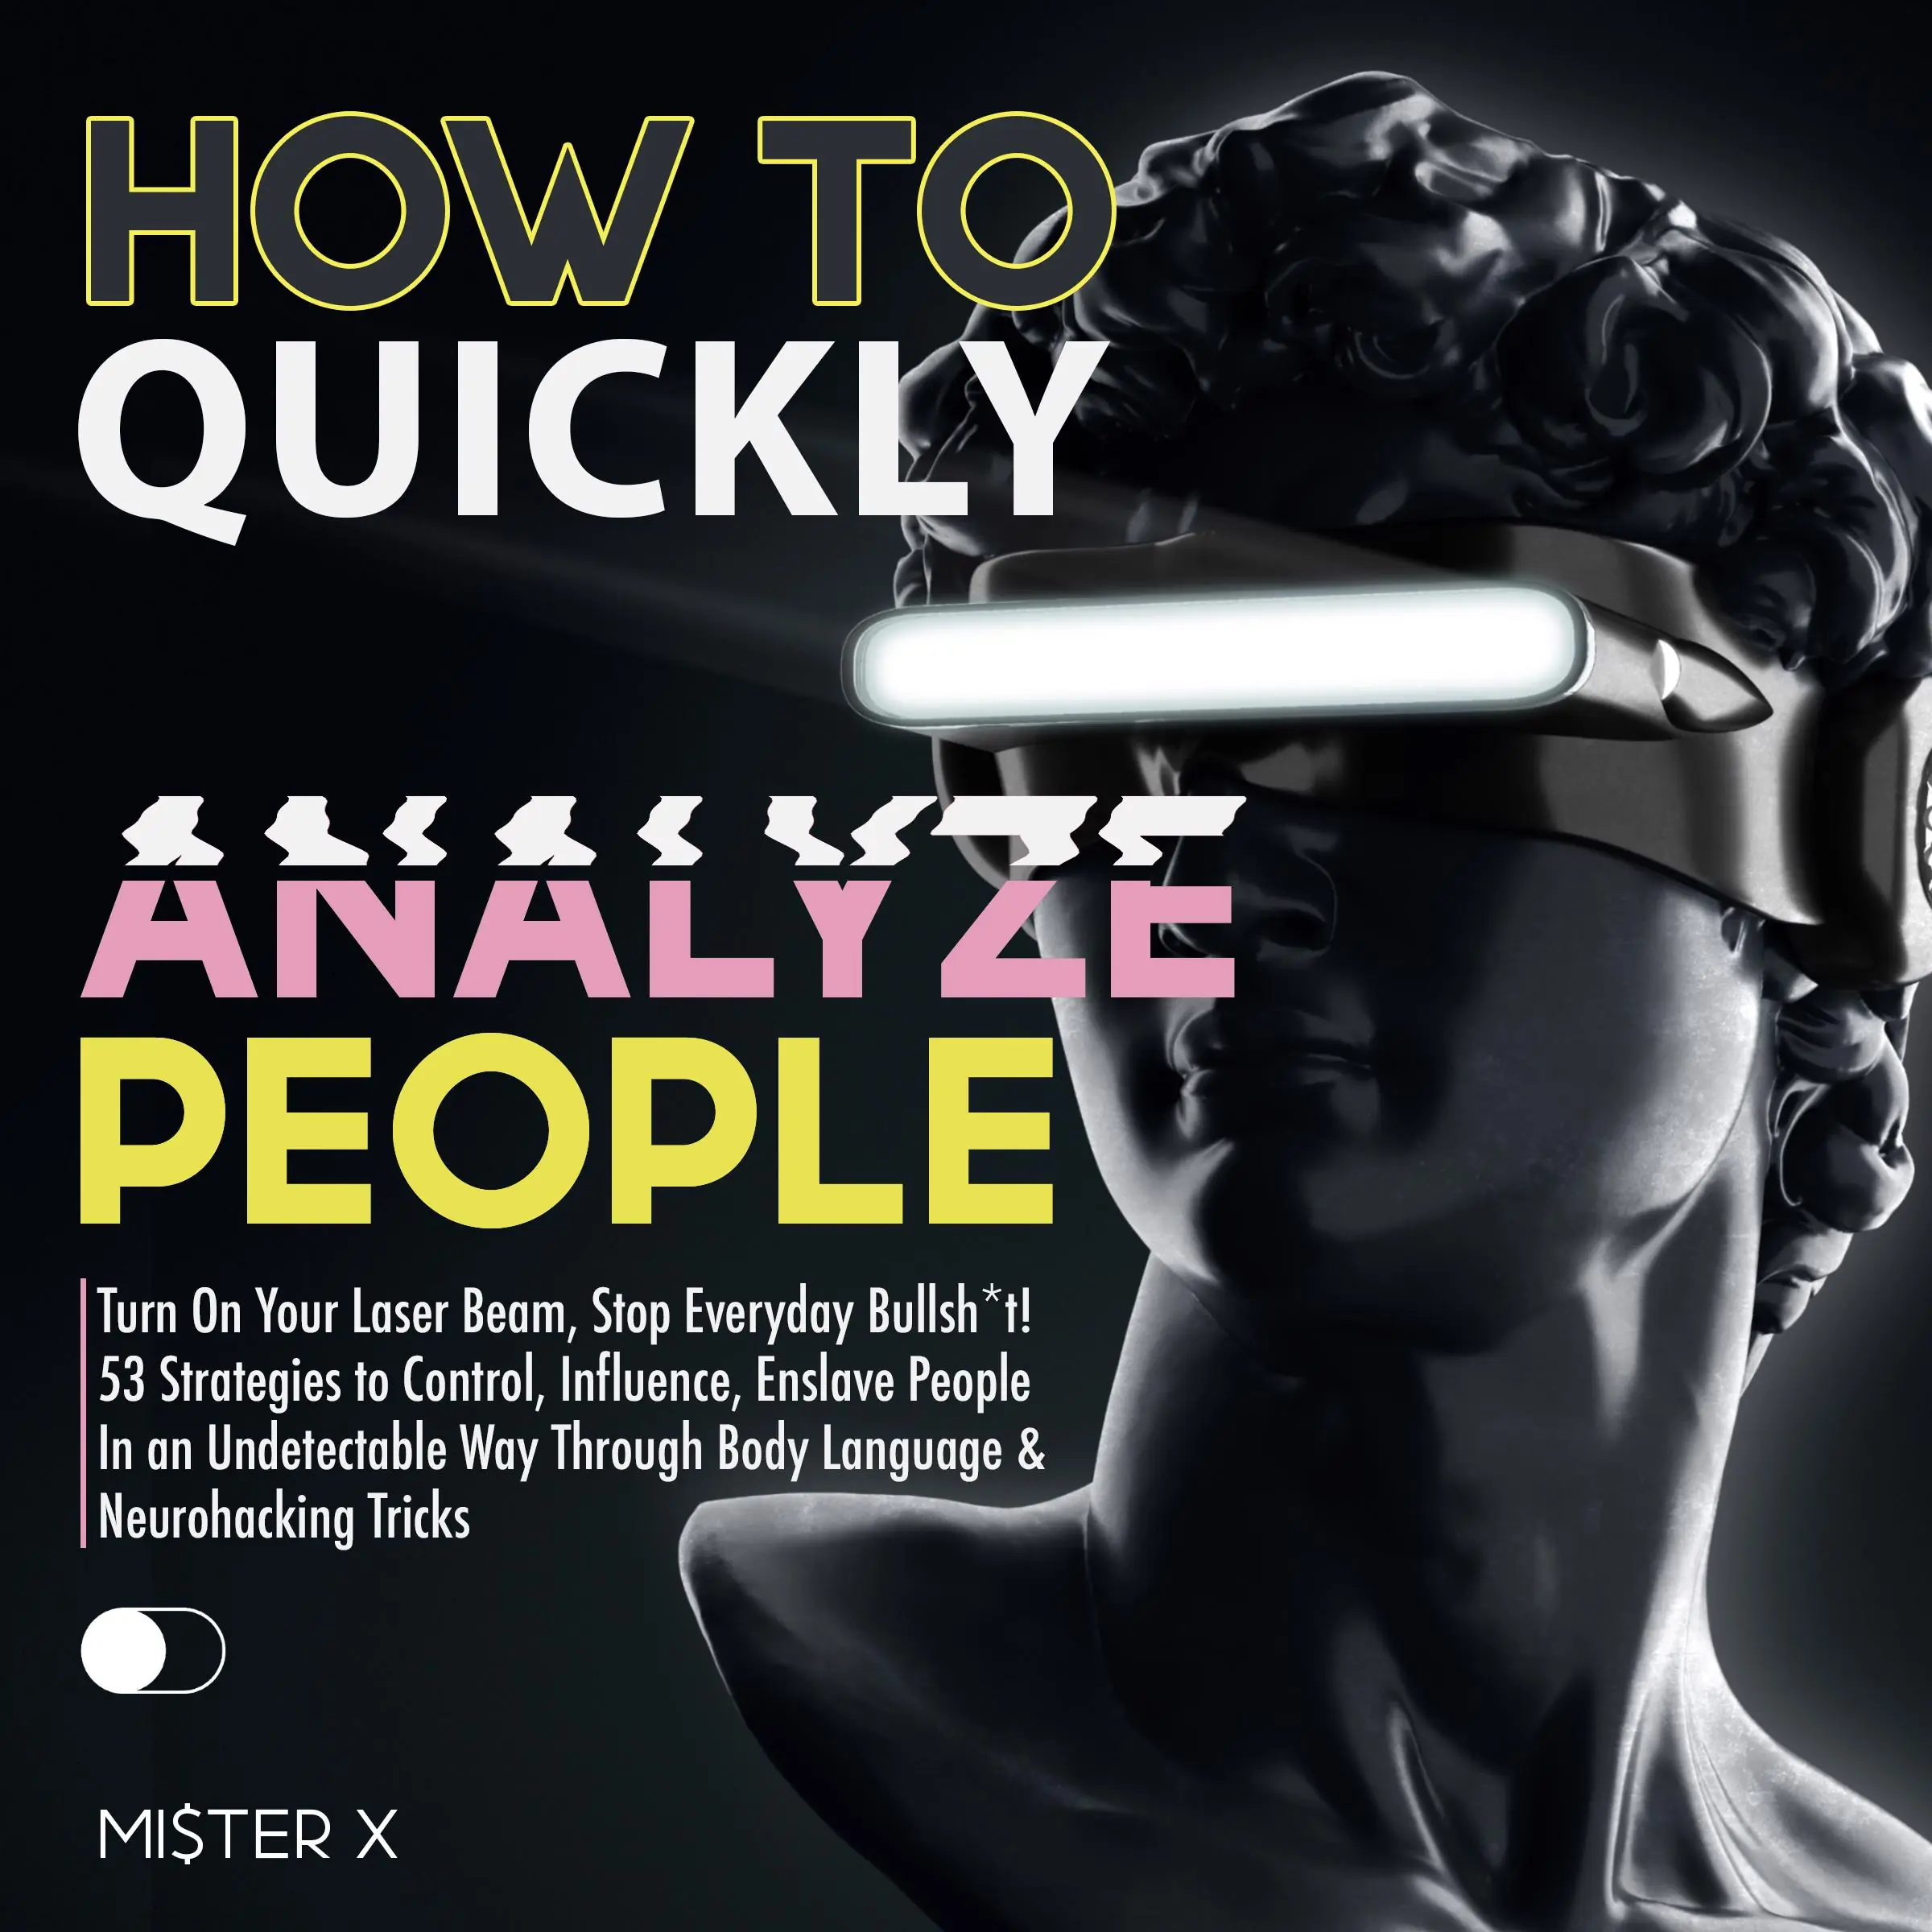 How to Quickly Analyze People Audiobook by Mister X